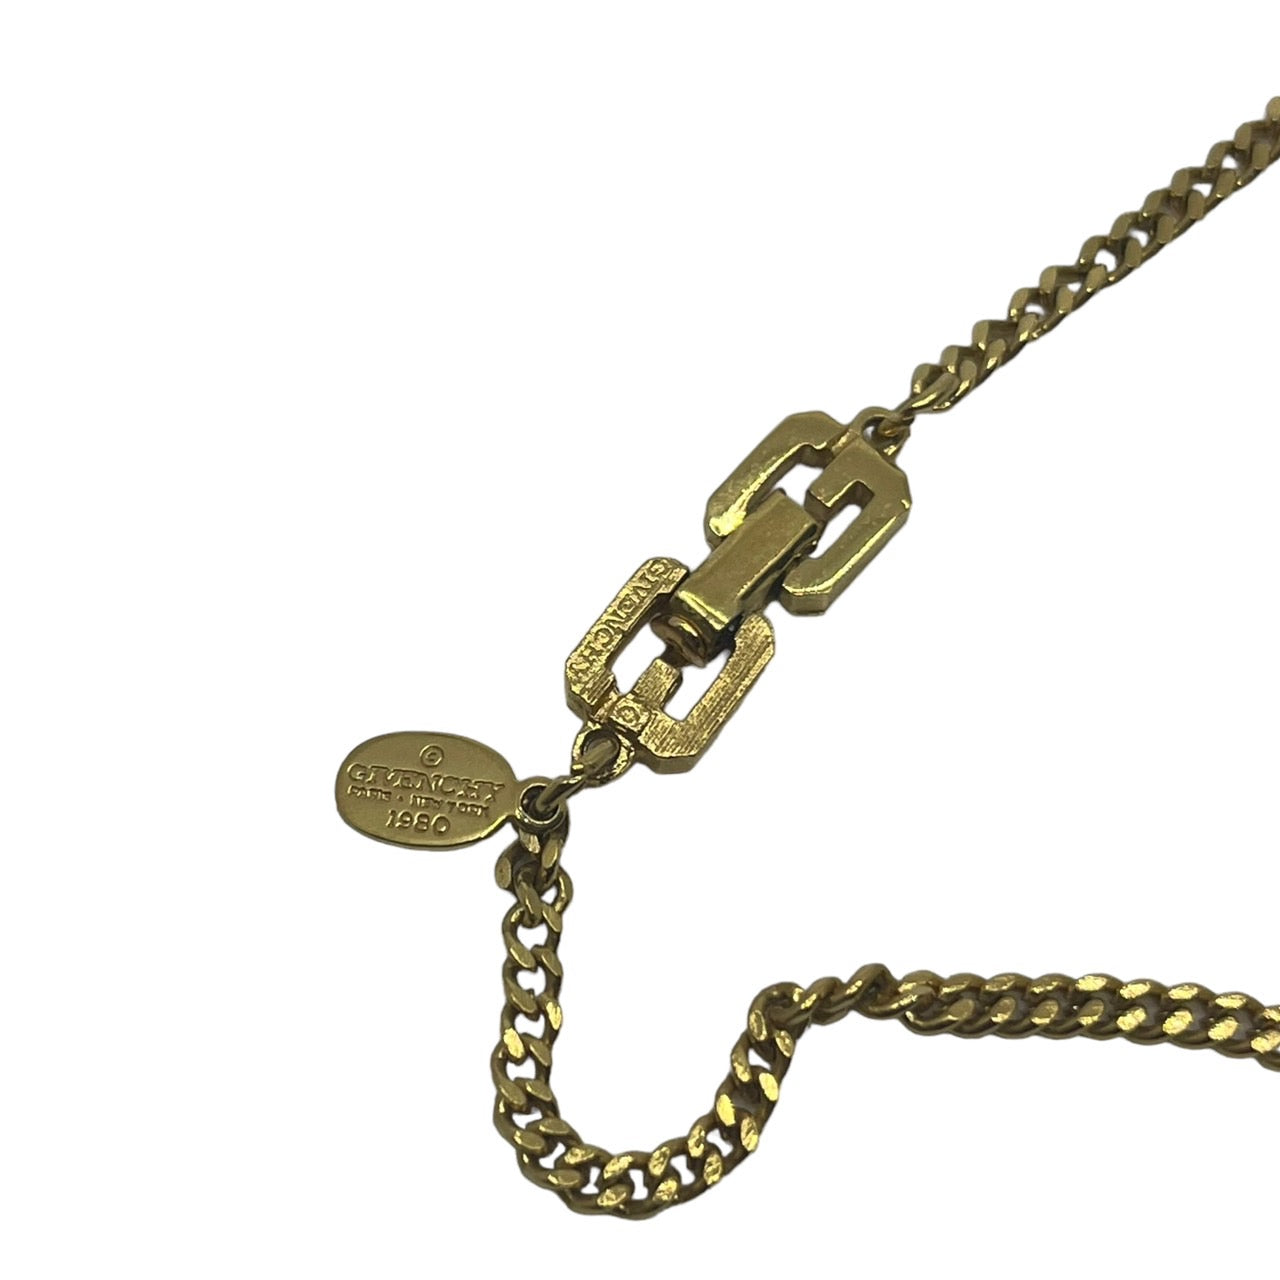 GIVENCHY(ジバンシィ) 80's G logo  chain necklace ロゴ チェーン ネックレス1980刻印 ジバンシー